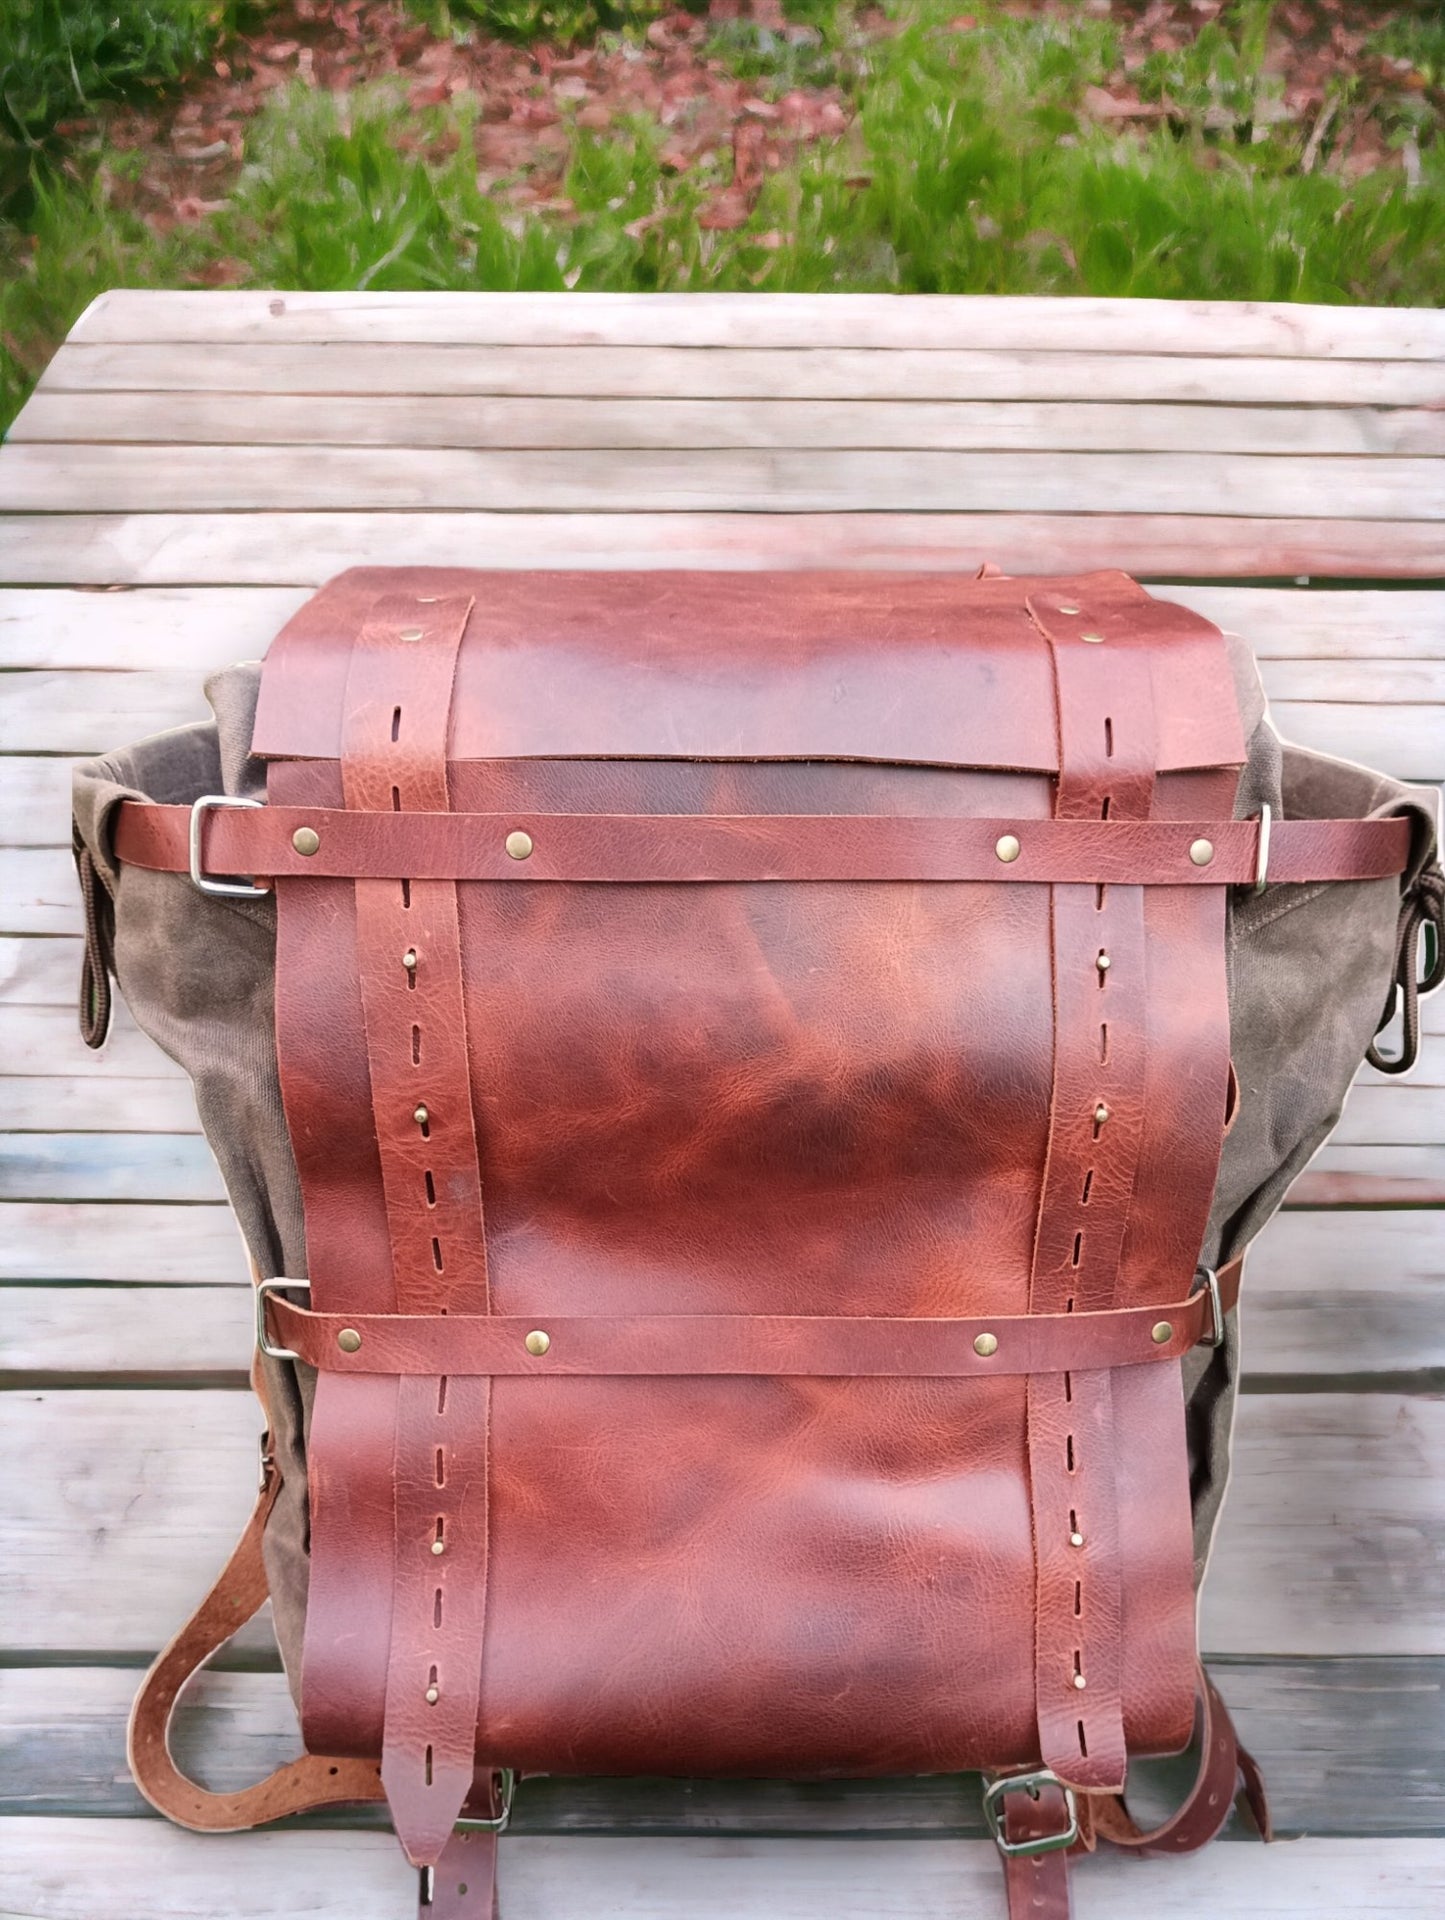 Daypack | Handmade | Leather Canvas Backpack | Brown - Beige colour options | Bushcraft Backpack | Camping Backpack | Hiking Backpack | Travel Backpack bushcraft - camping - hiking backpack 99percenthandmade   